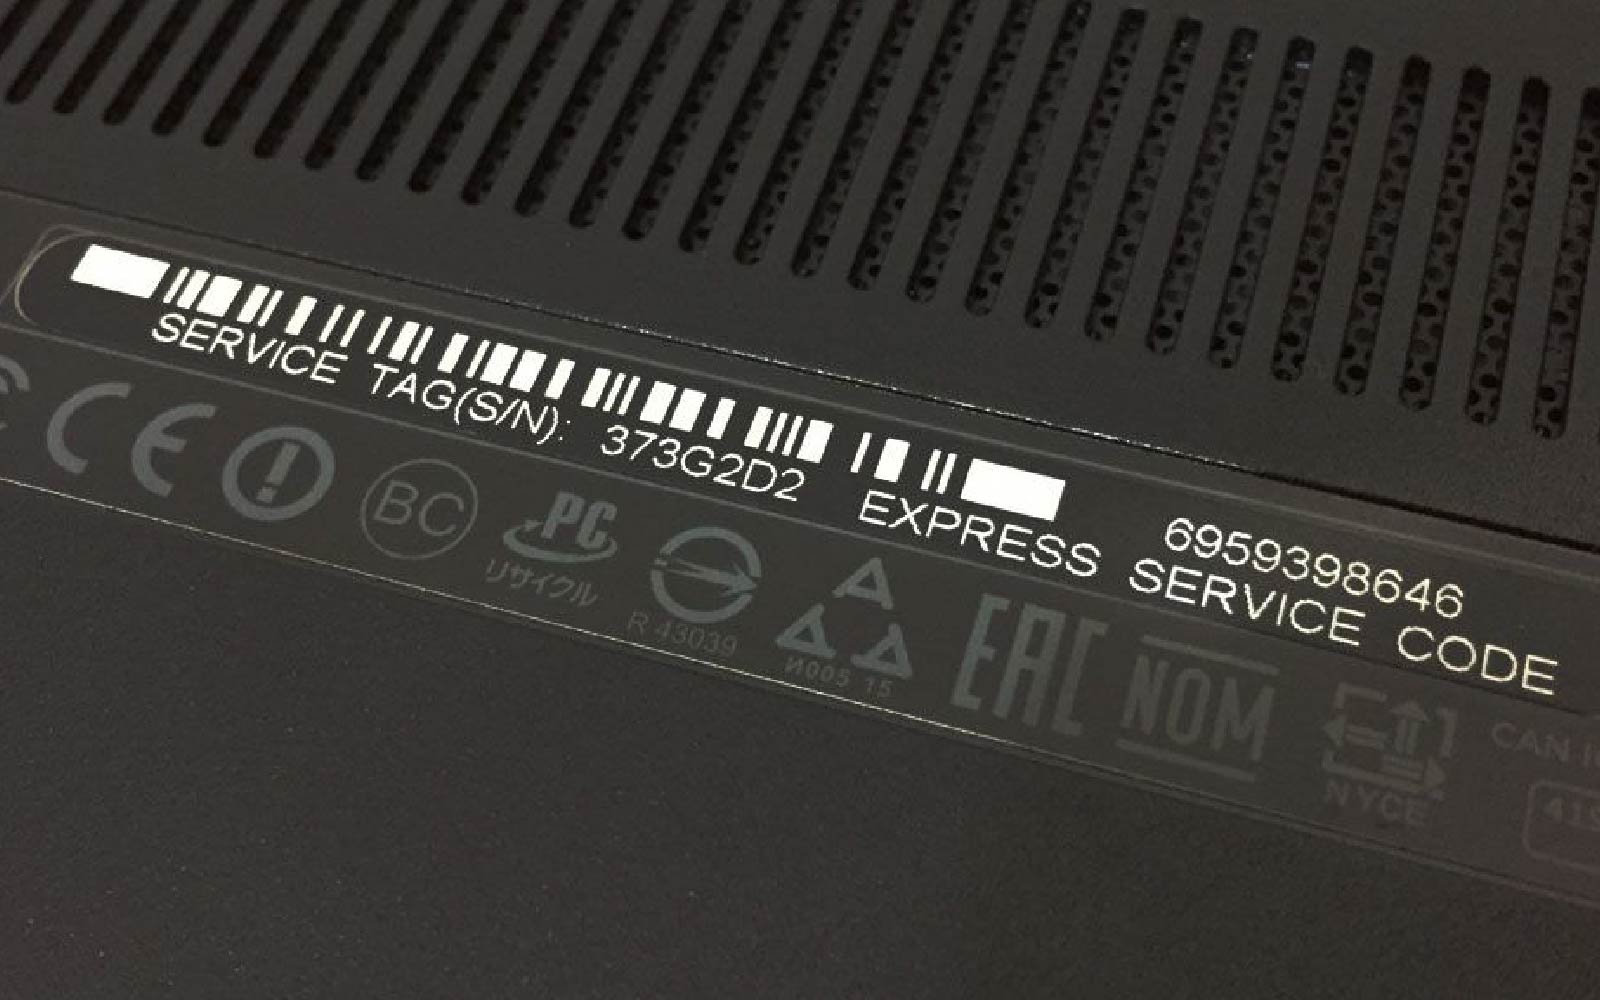 What Is Laptop Service Tag